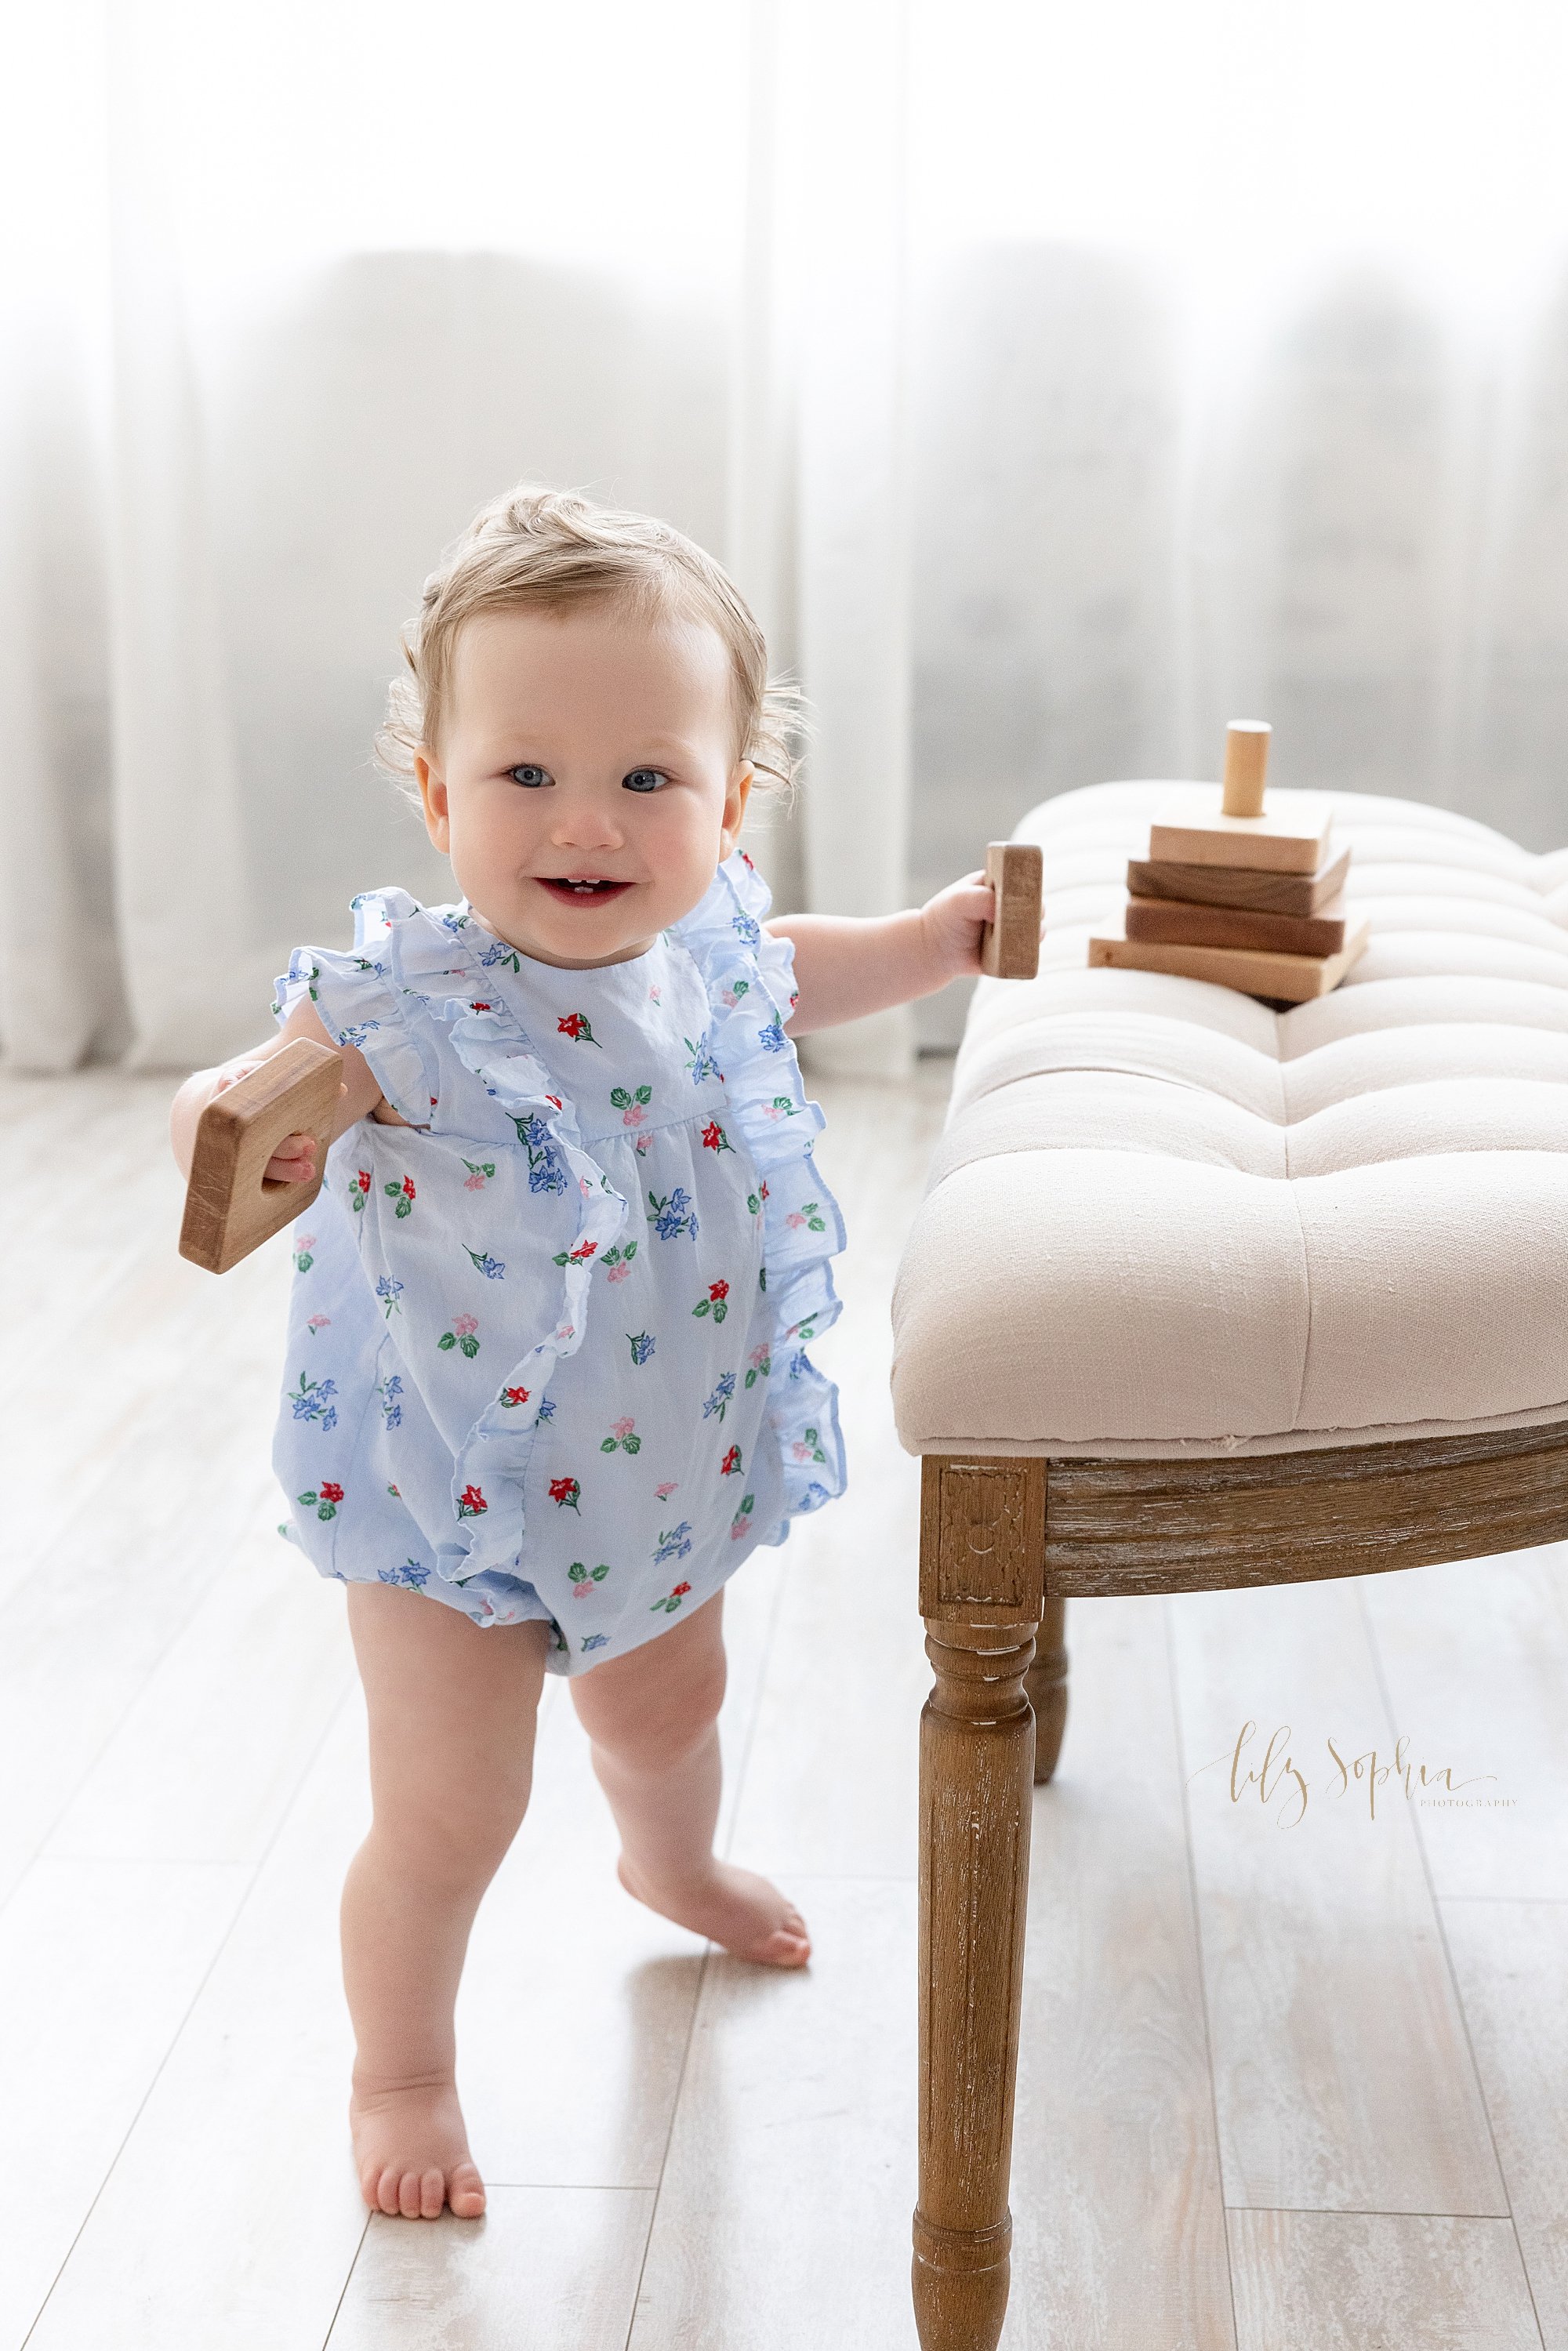  First birthday photo session of a one year old baby girl as she stands next to a tufted bench in front of a window streaming natural light as she plays with a wooden stacking toy taken near Virginia Highlands in Atlanta. 